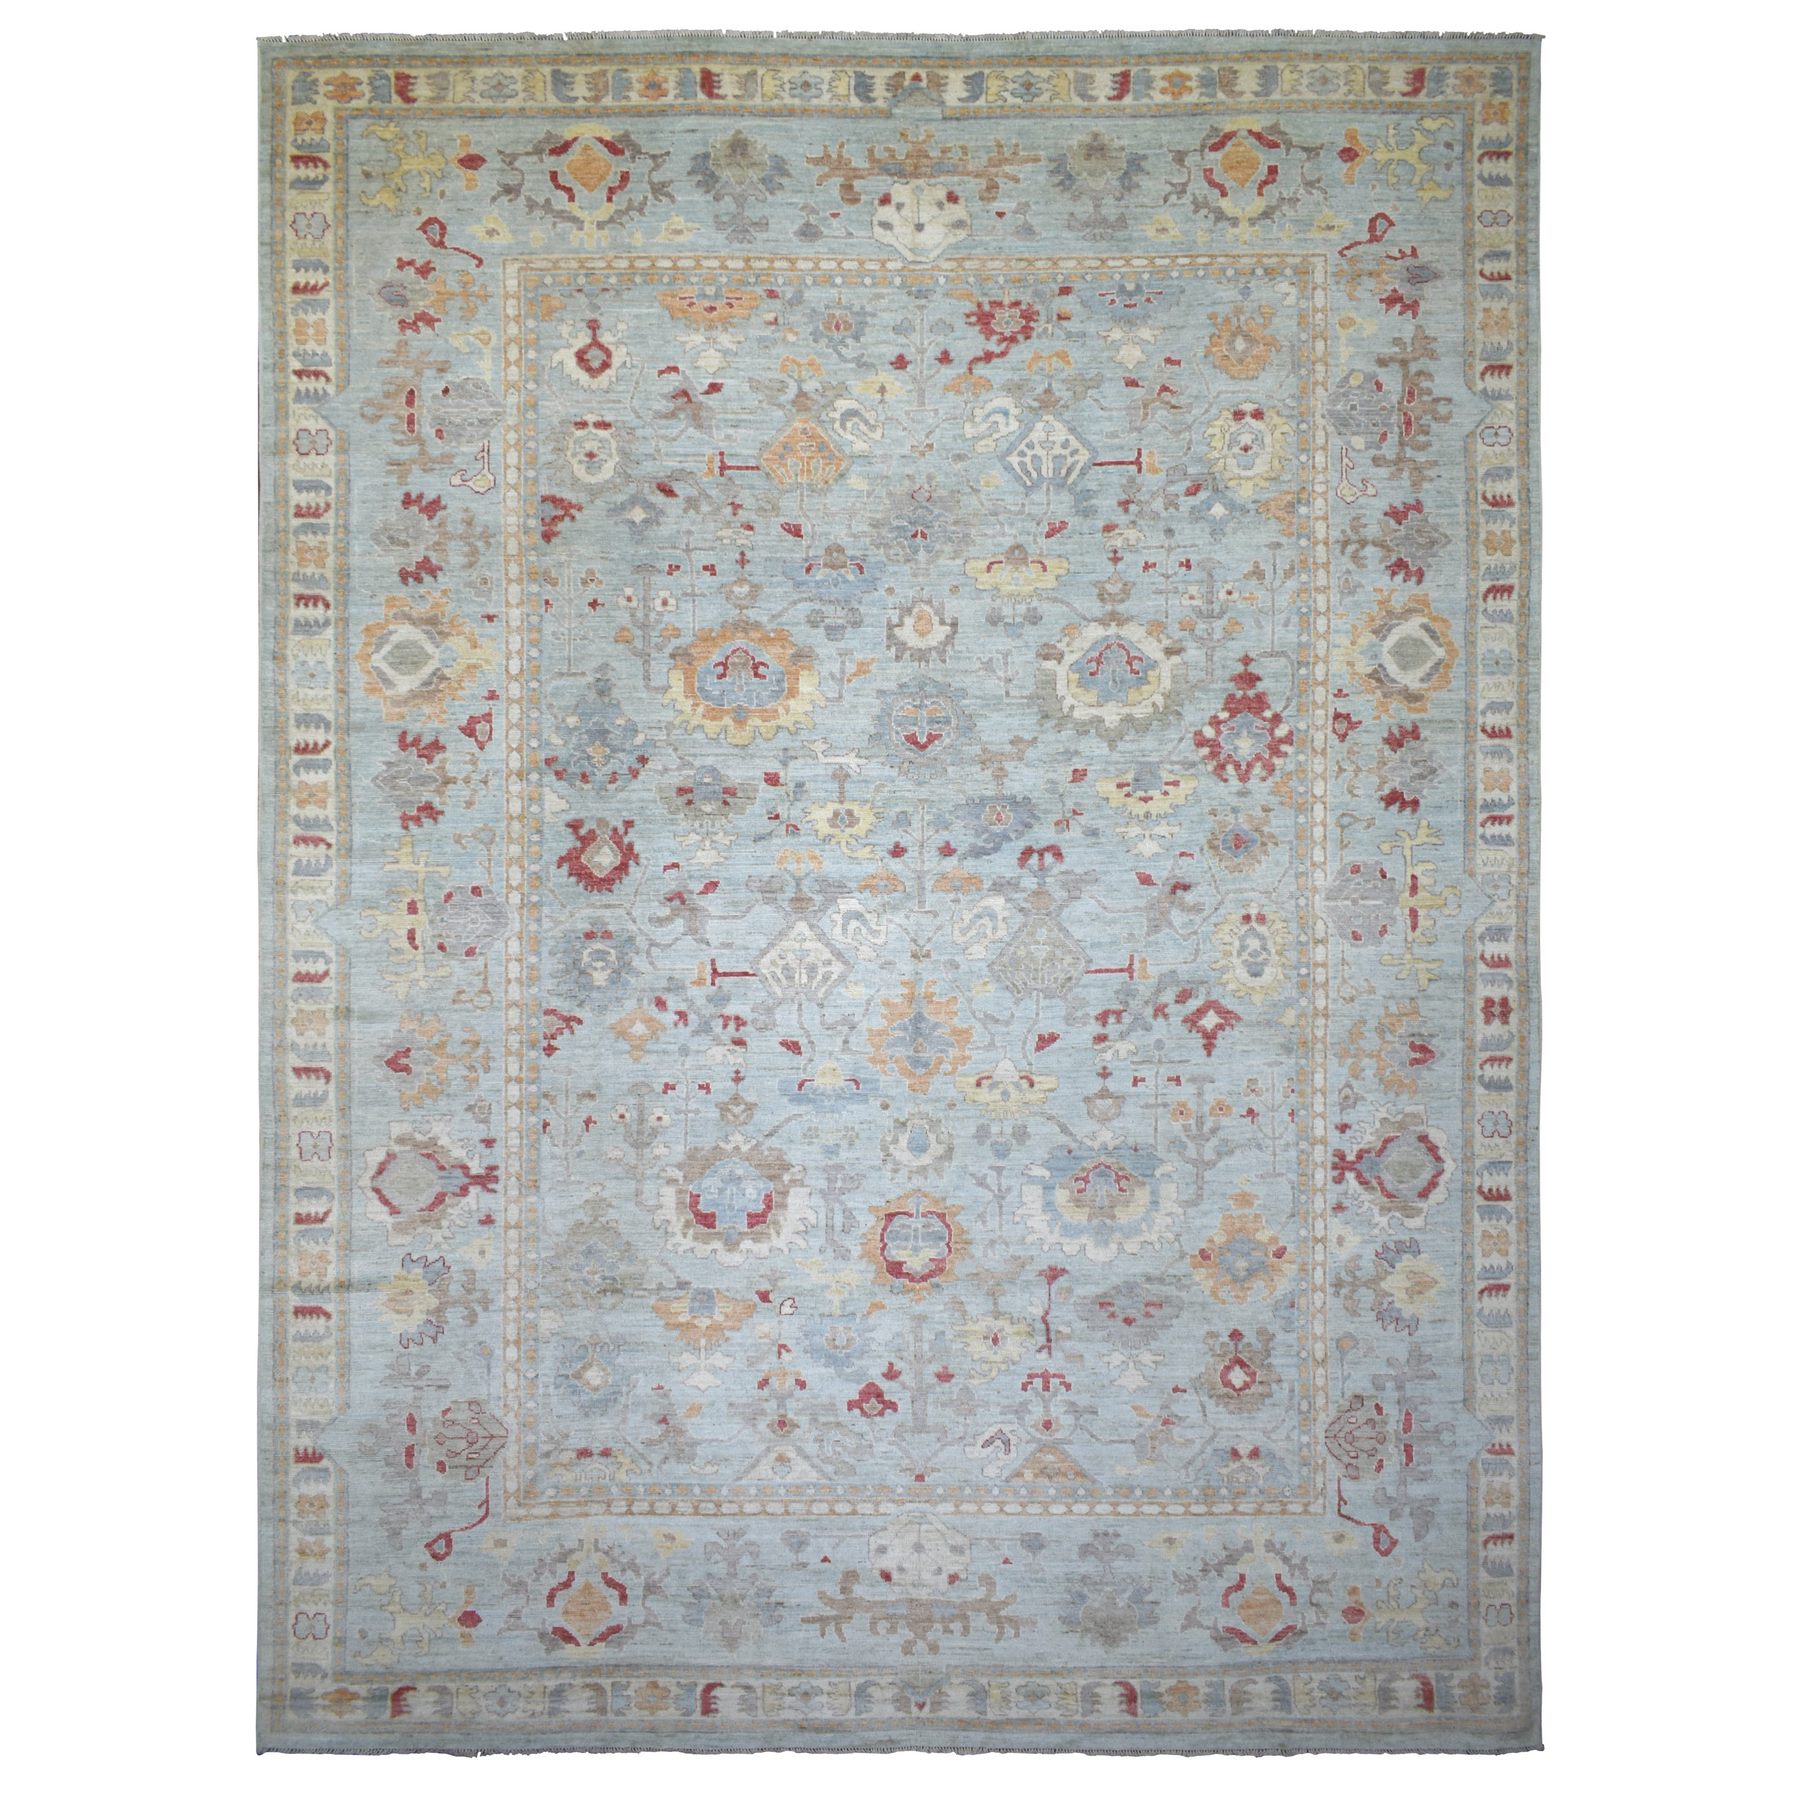 11'5"x16' Light Blue All Over Design Angora Oushak with a Beautiful, Floral Pattern Hand Woven Soft, Afghan Wool Oriental Oversized Rug 